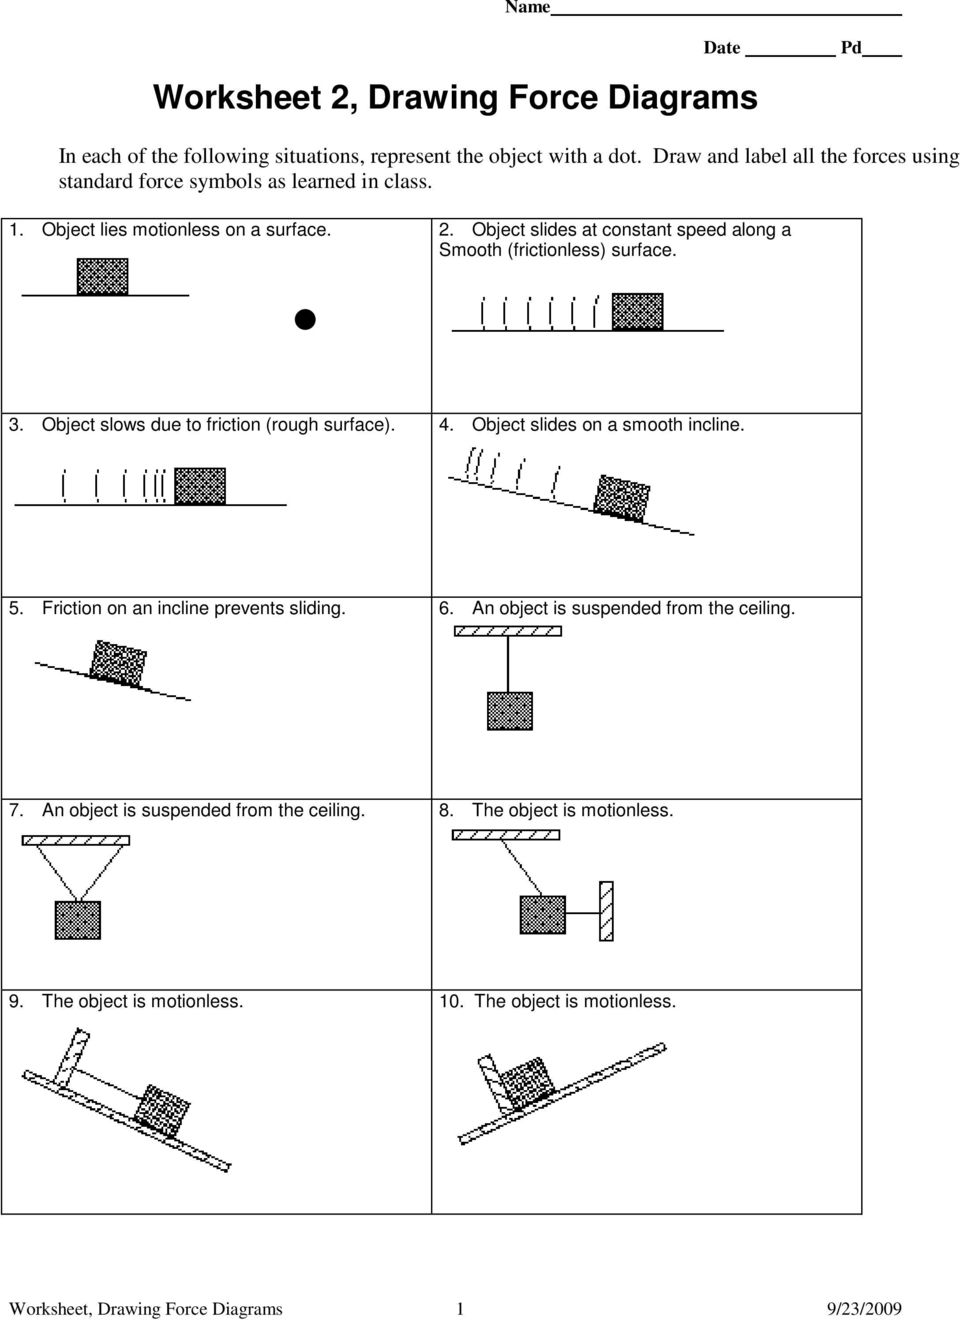 Free Body Diagram Worksheet With Answers - Wiring Site Resource Within Free Body Diagram Worksheet Answers